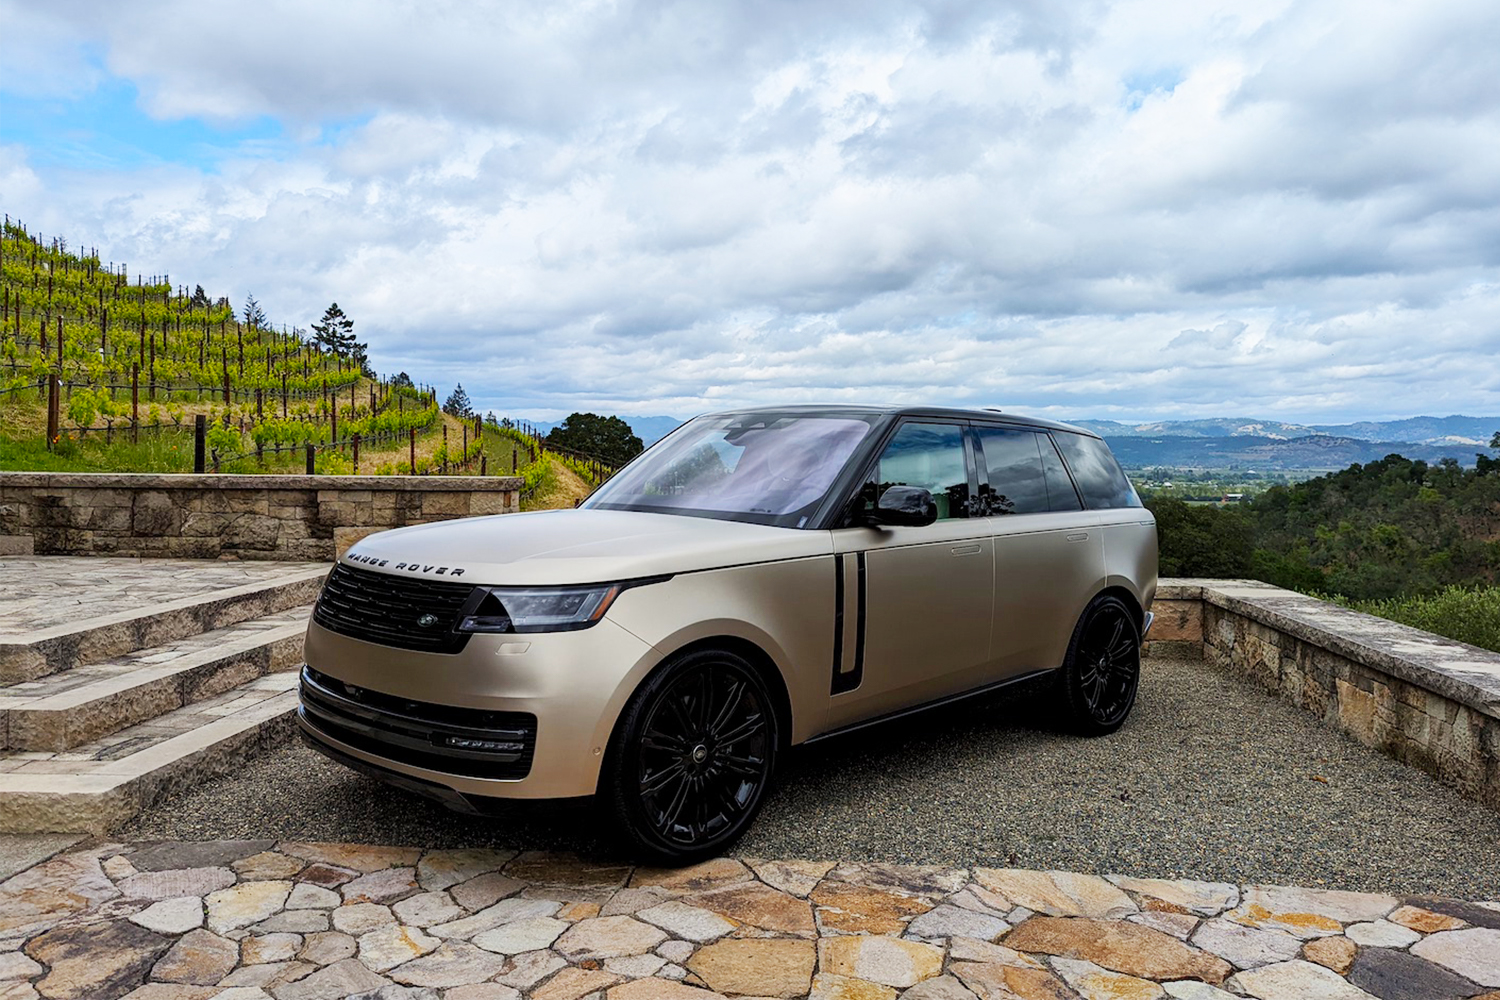 The new 2022 Range Rover in Napa Valley